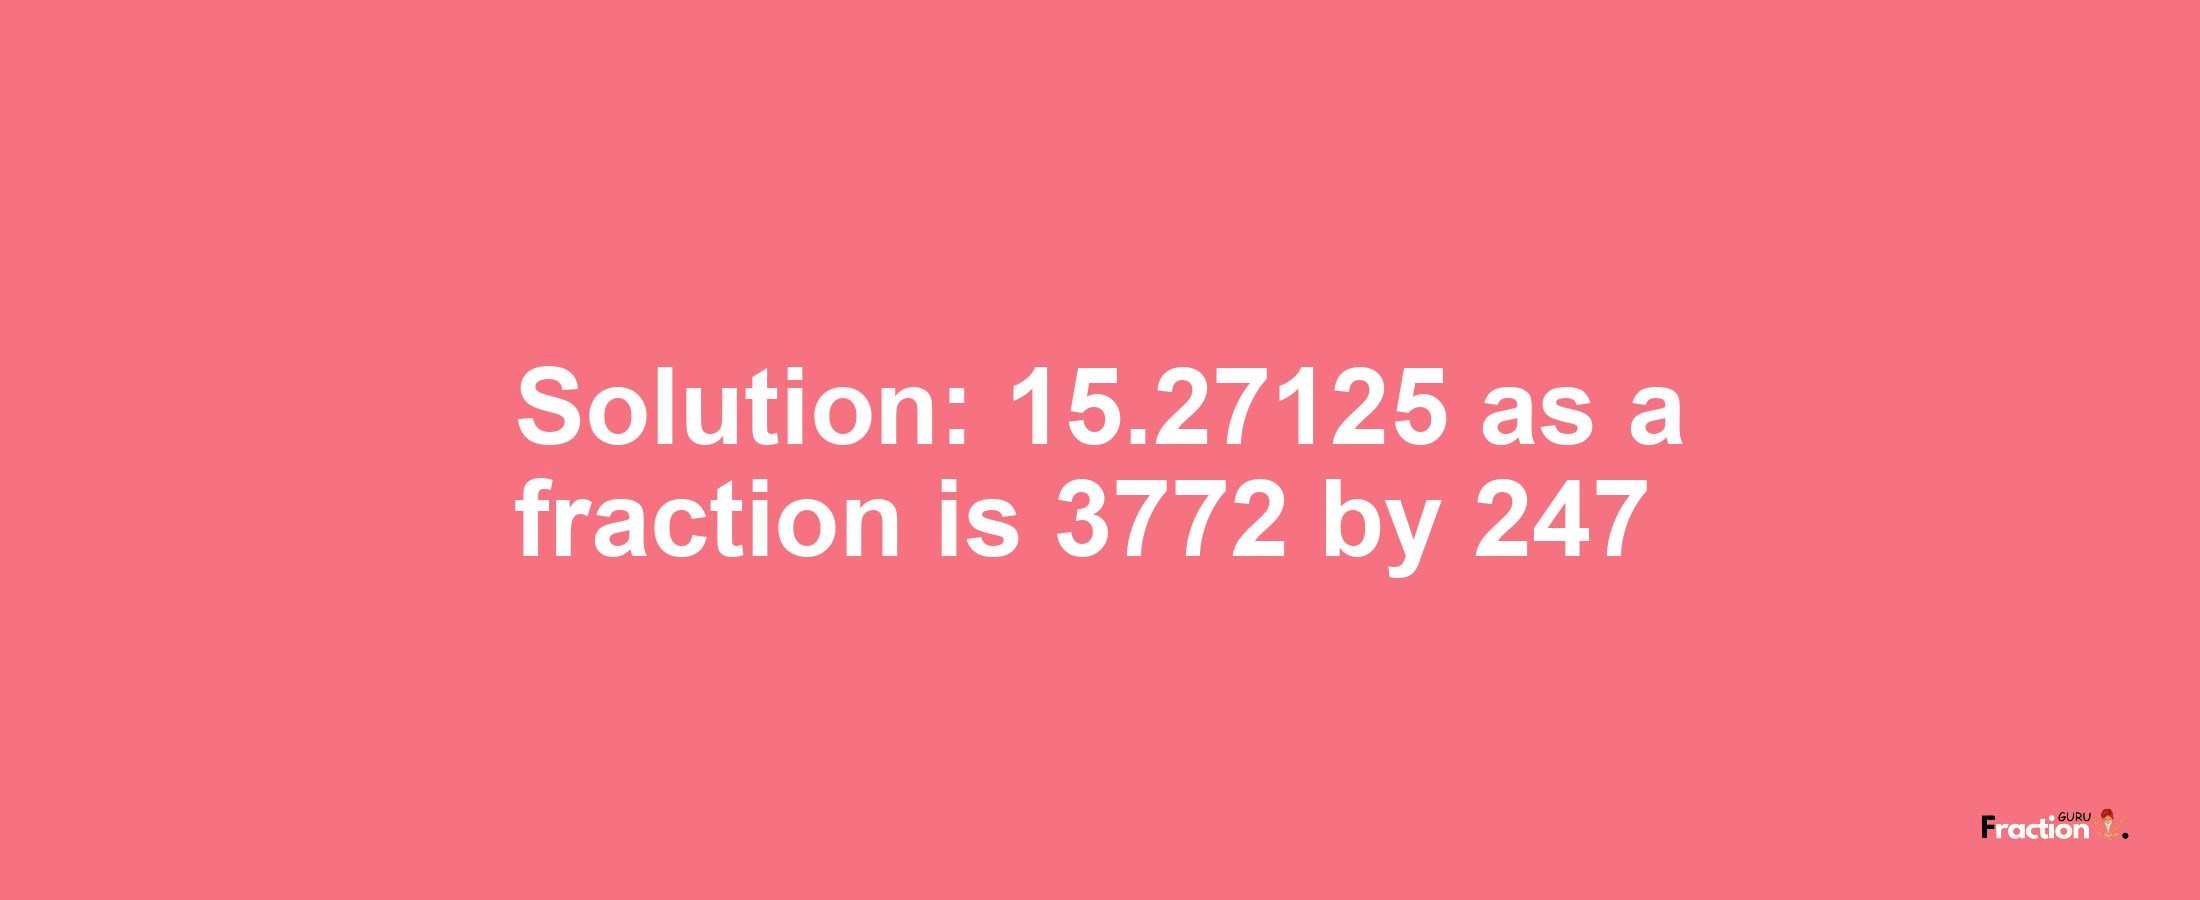 Solution:15.27125 as a fraction is 3772/247